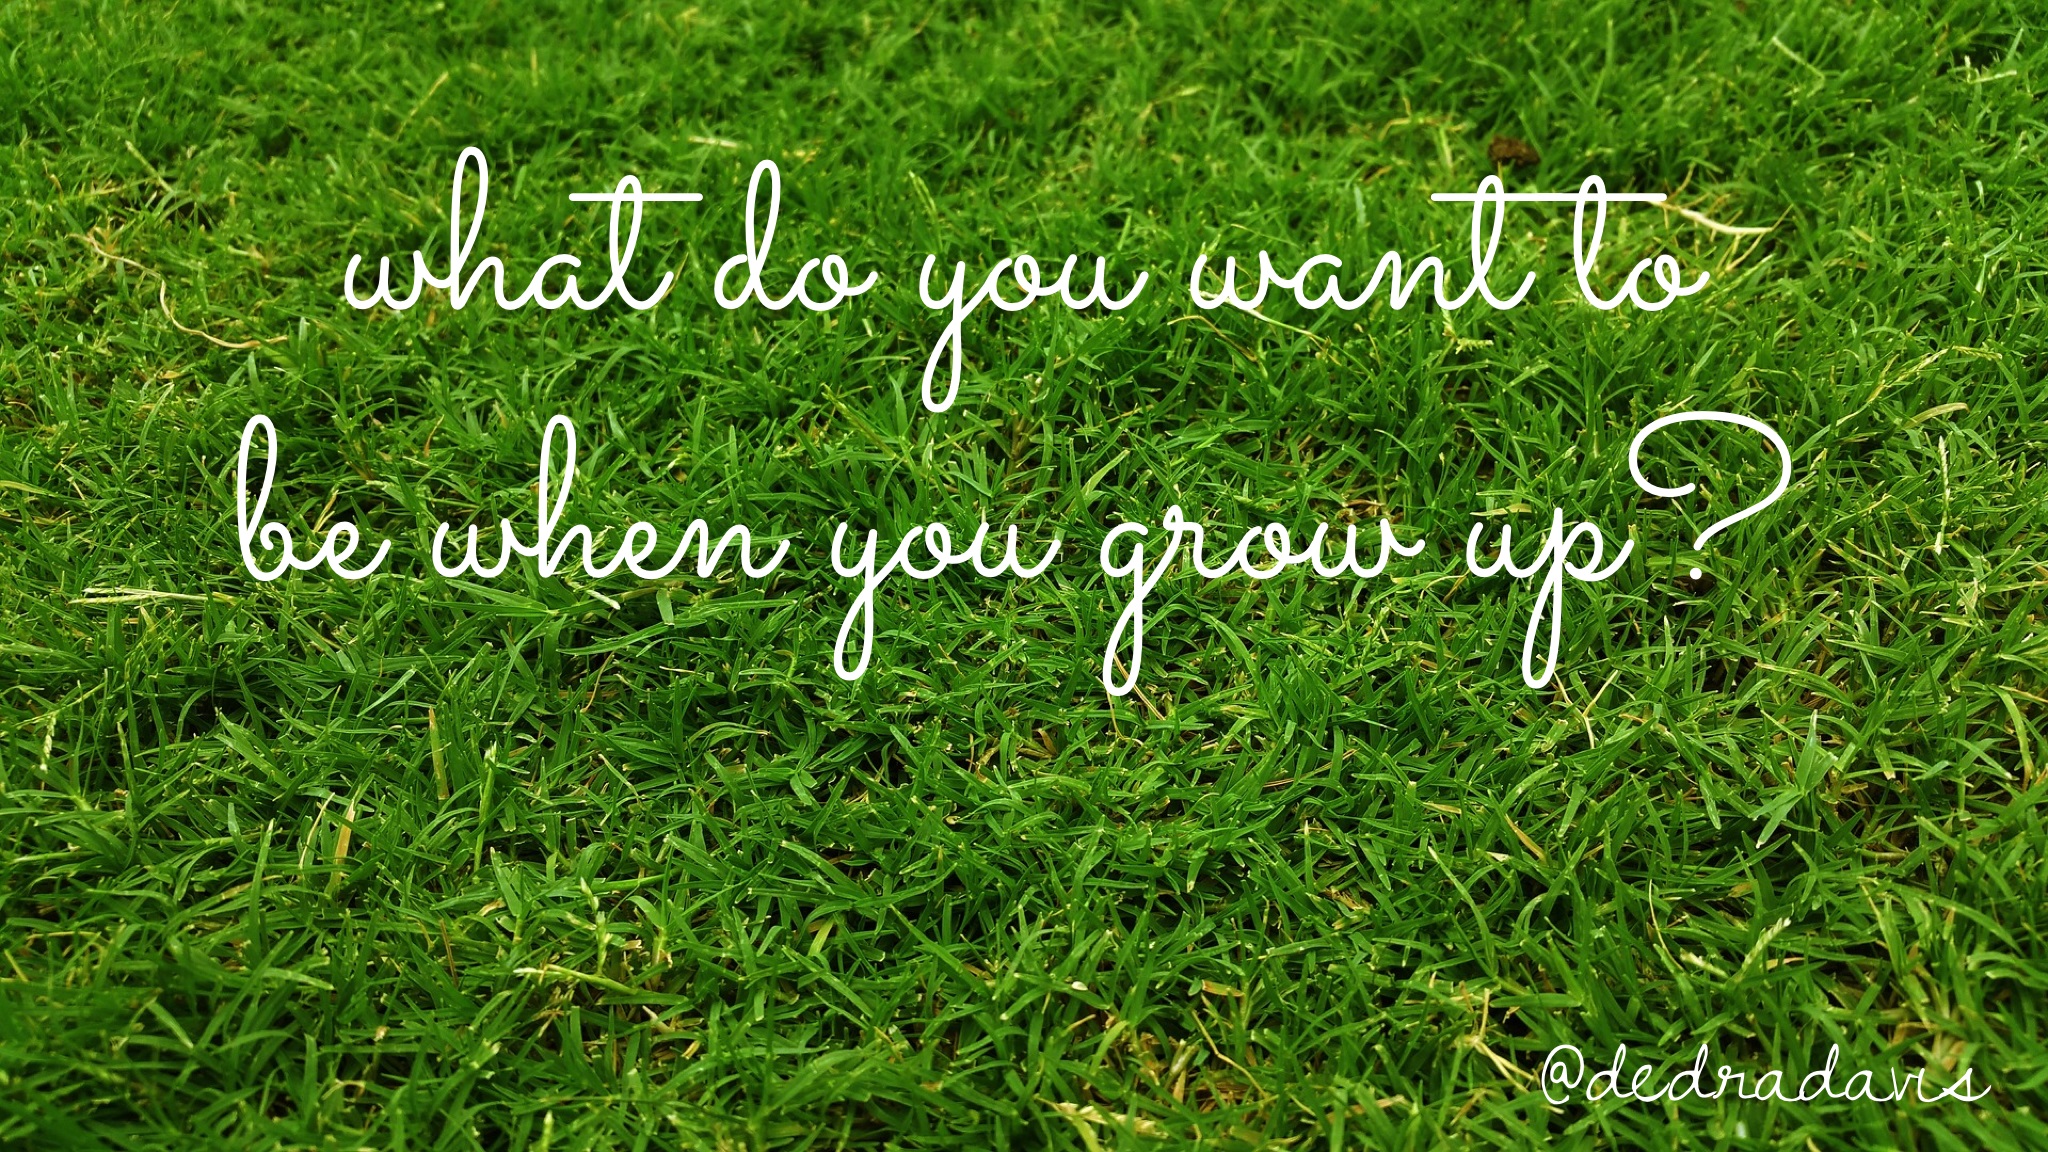 What Do You Want to be When You Grow up?